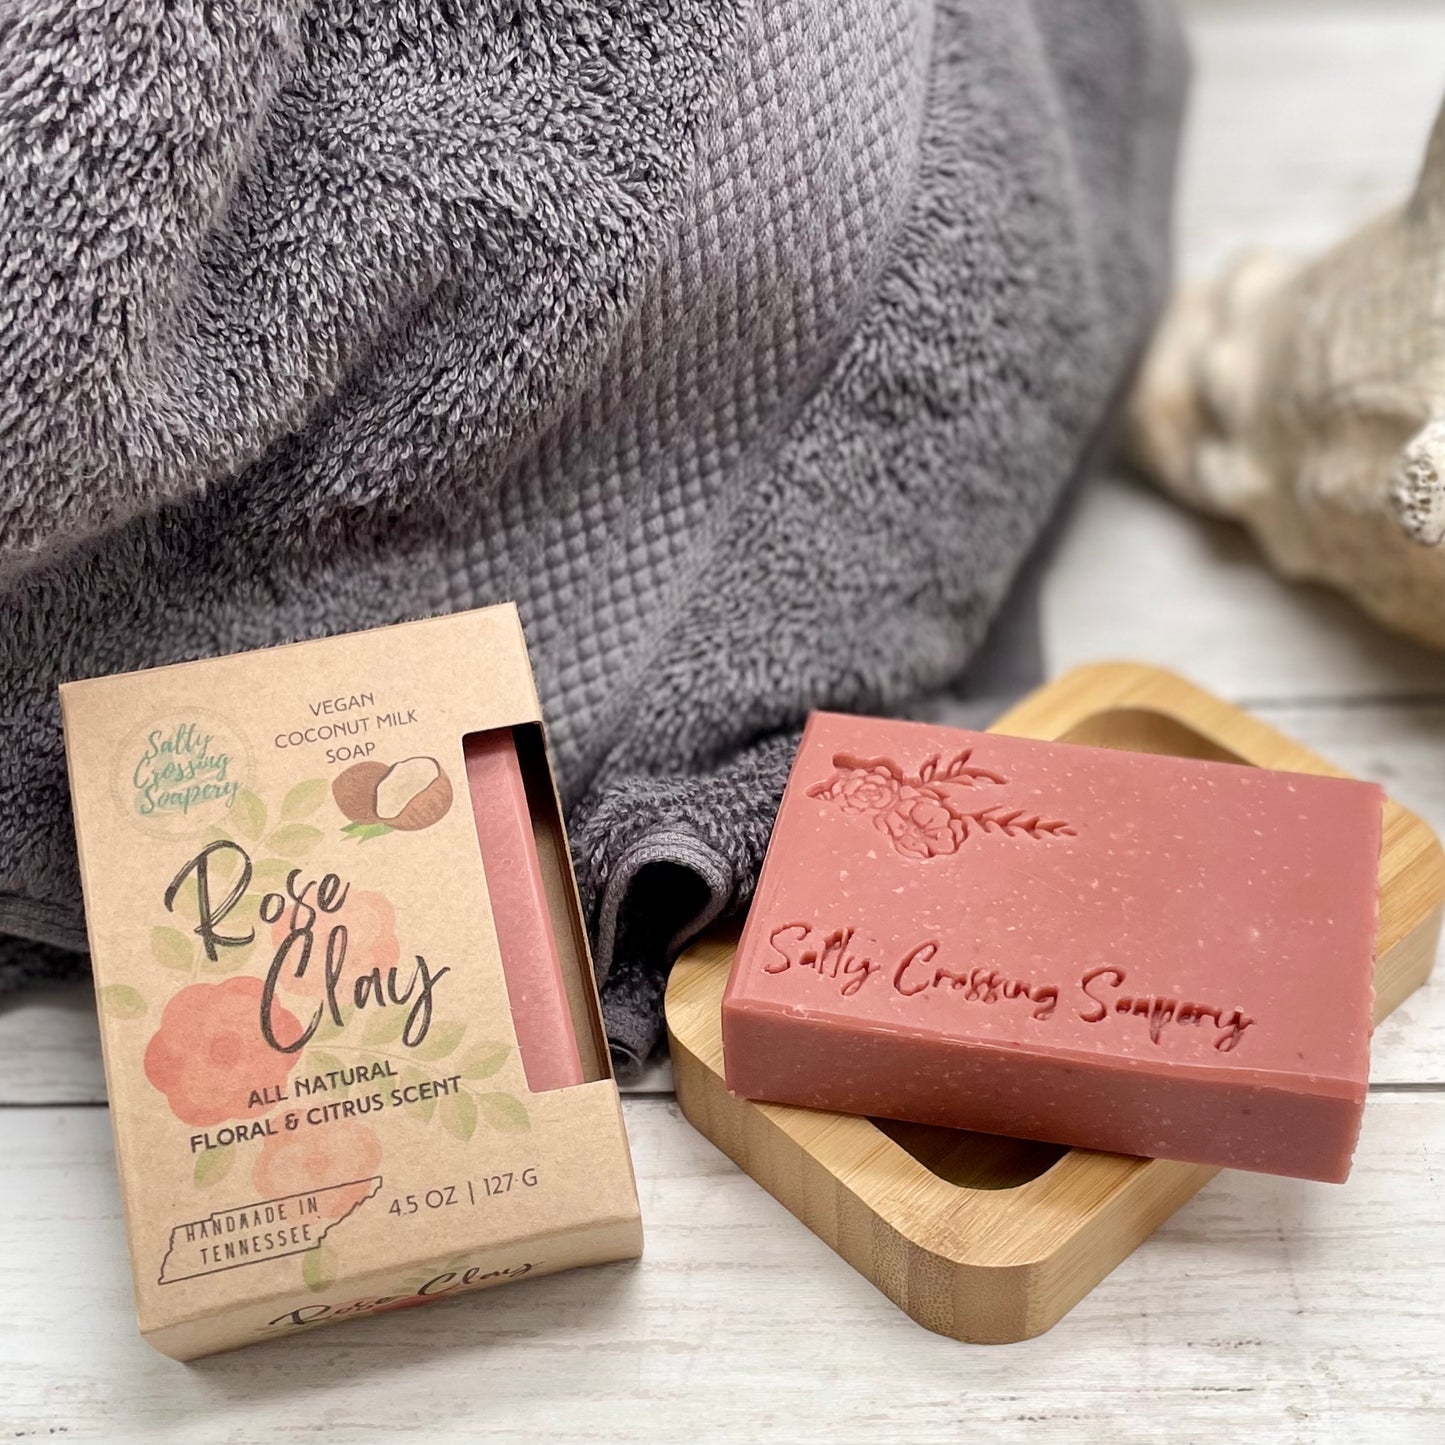 Vegan Artisan Soap Bar | Handmade with All Natural Ingredients | Scented with Essential Oils | Ecofriendly Skincare